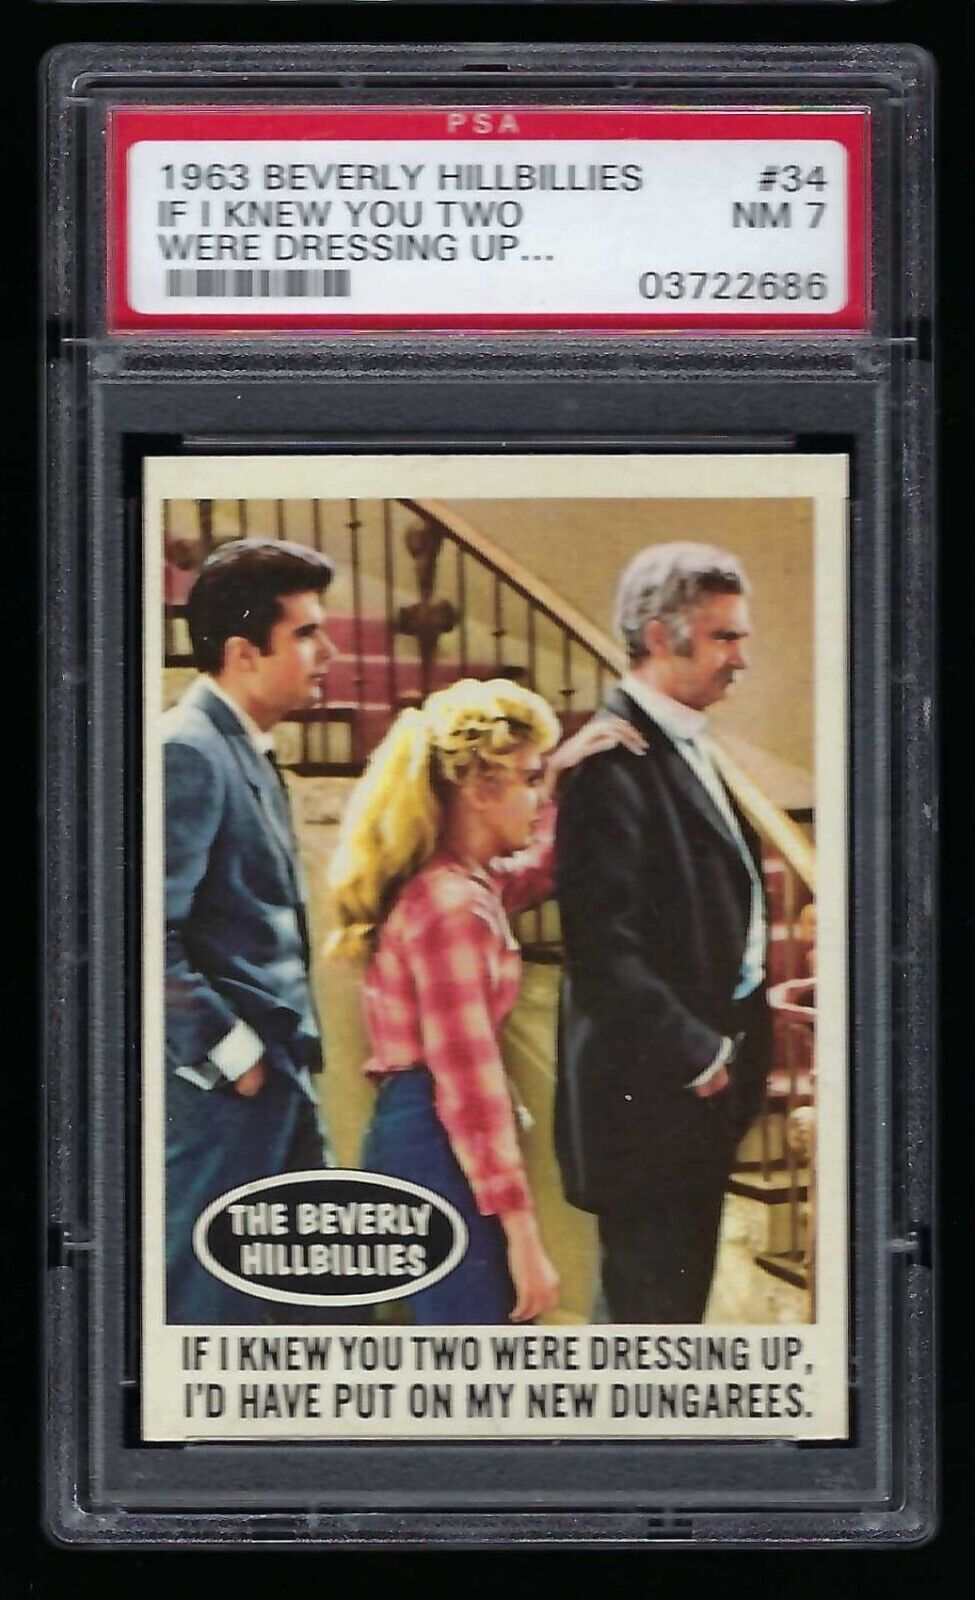 1963 Beverly Hillbillies #34 If I Knew You Two Were Dressing Up PSA 7